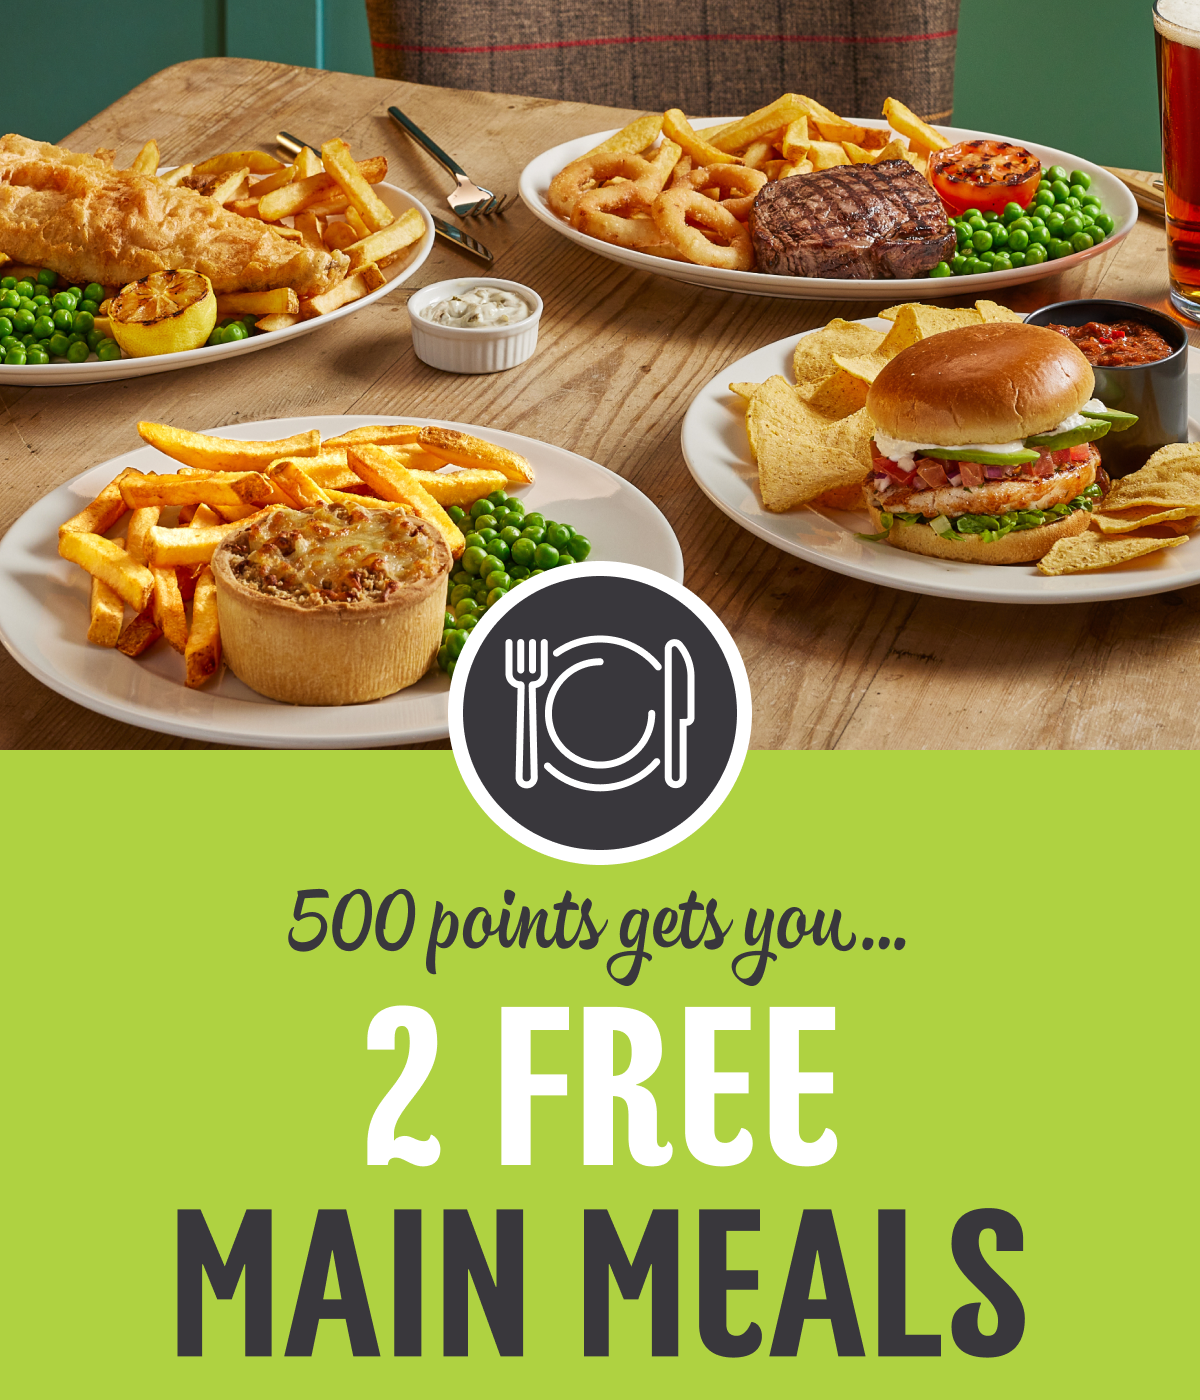 Free meal on your birthday